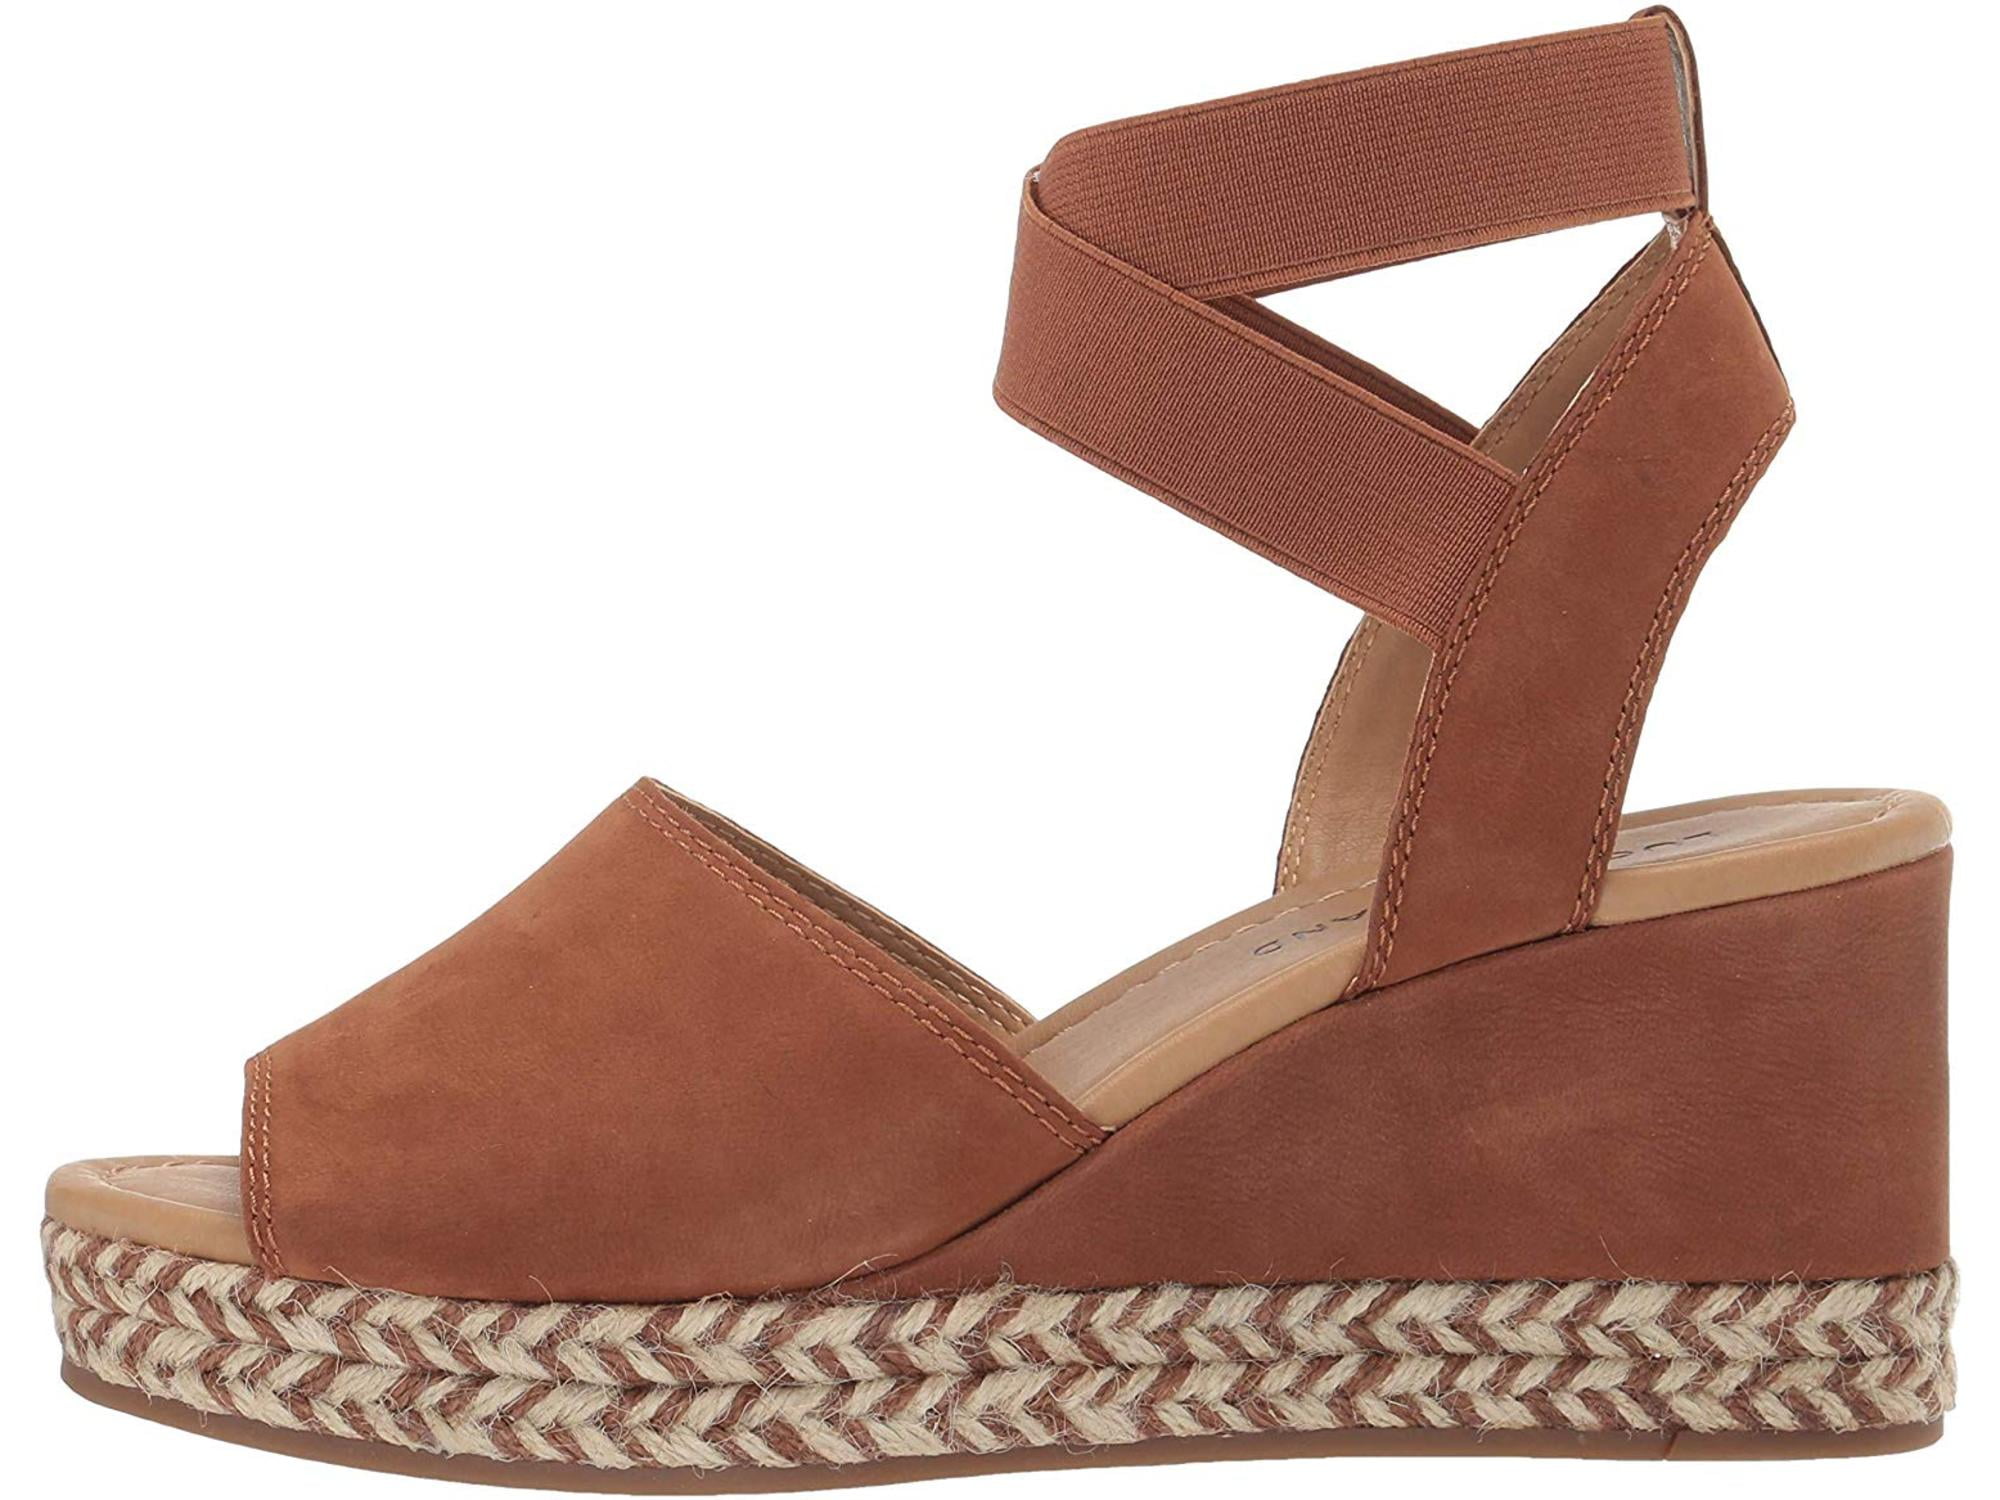 lucky brand wedge sandals